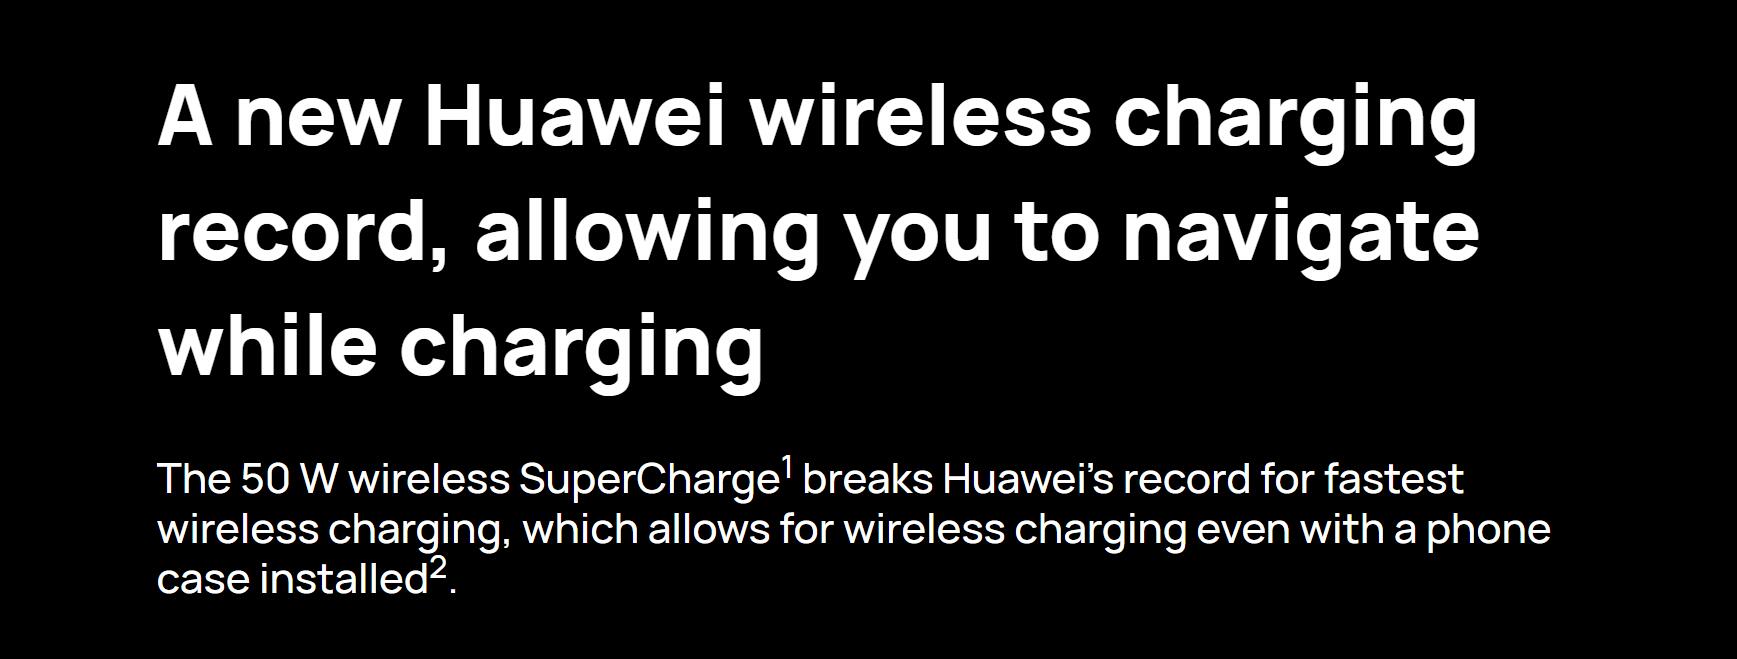 HUAWEI_50W_SuperCharge_Wireless_Car_Charger-03.jpg